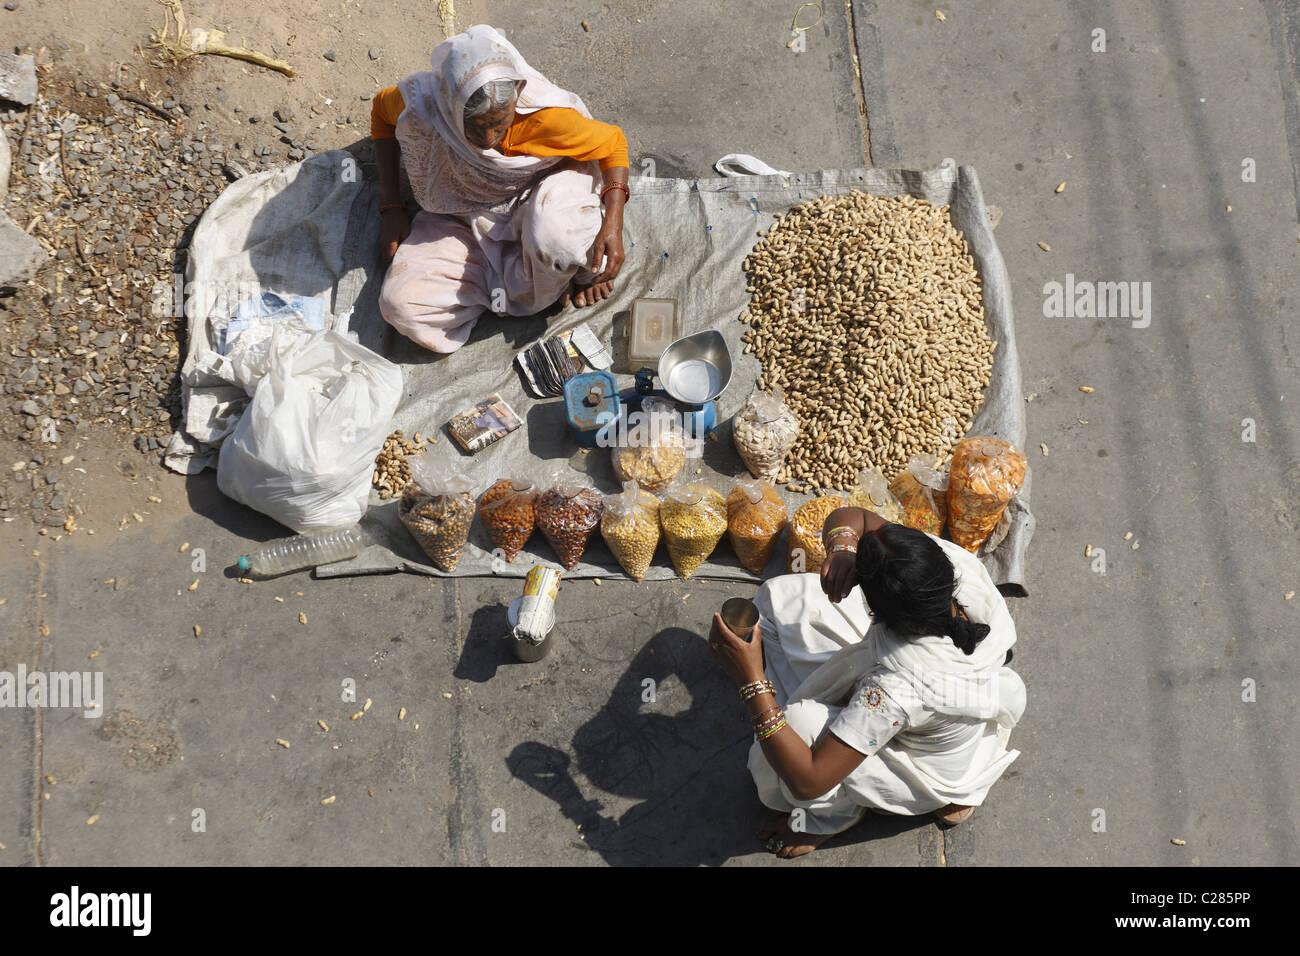 IND, India,20110310, Daily routine Stock Photo